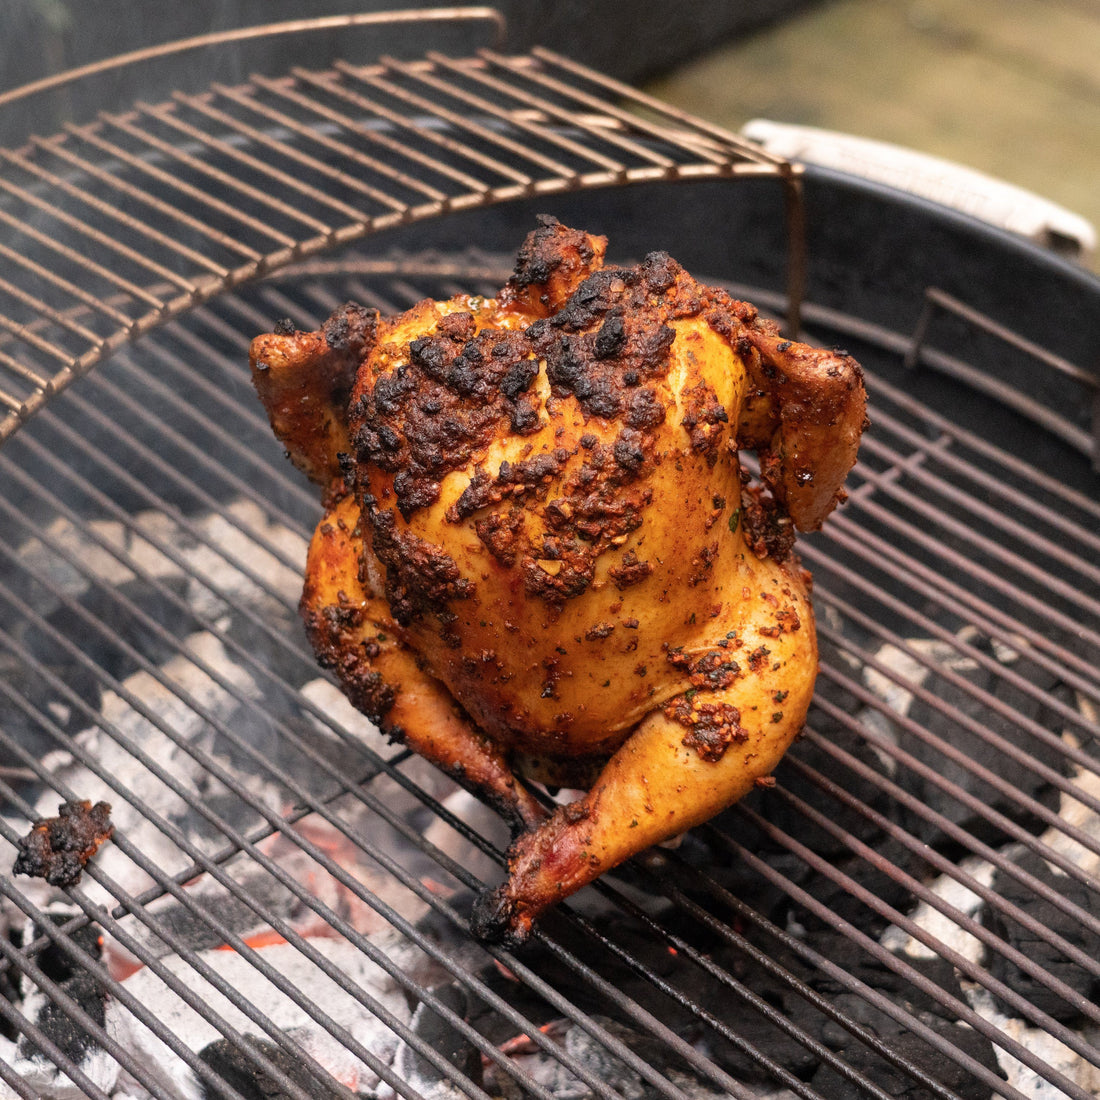 Cooked beer roasted chicken on a Weber Grill.